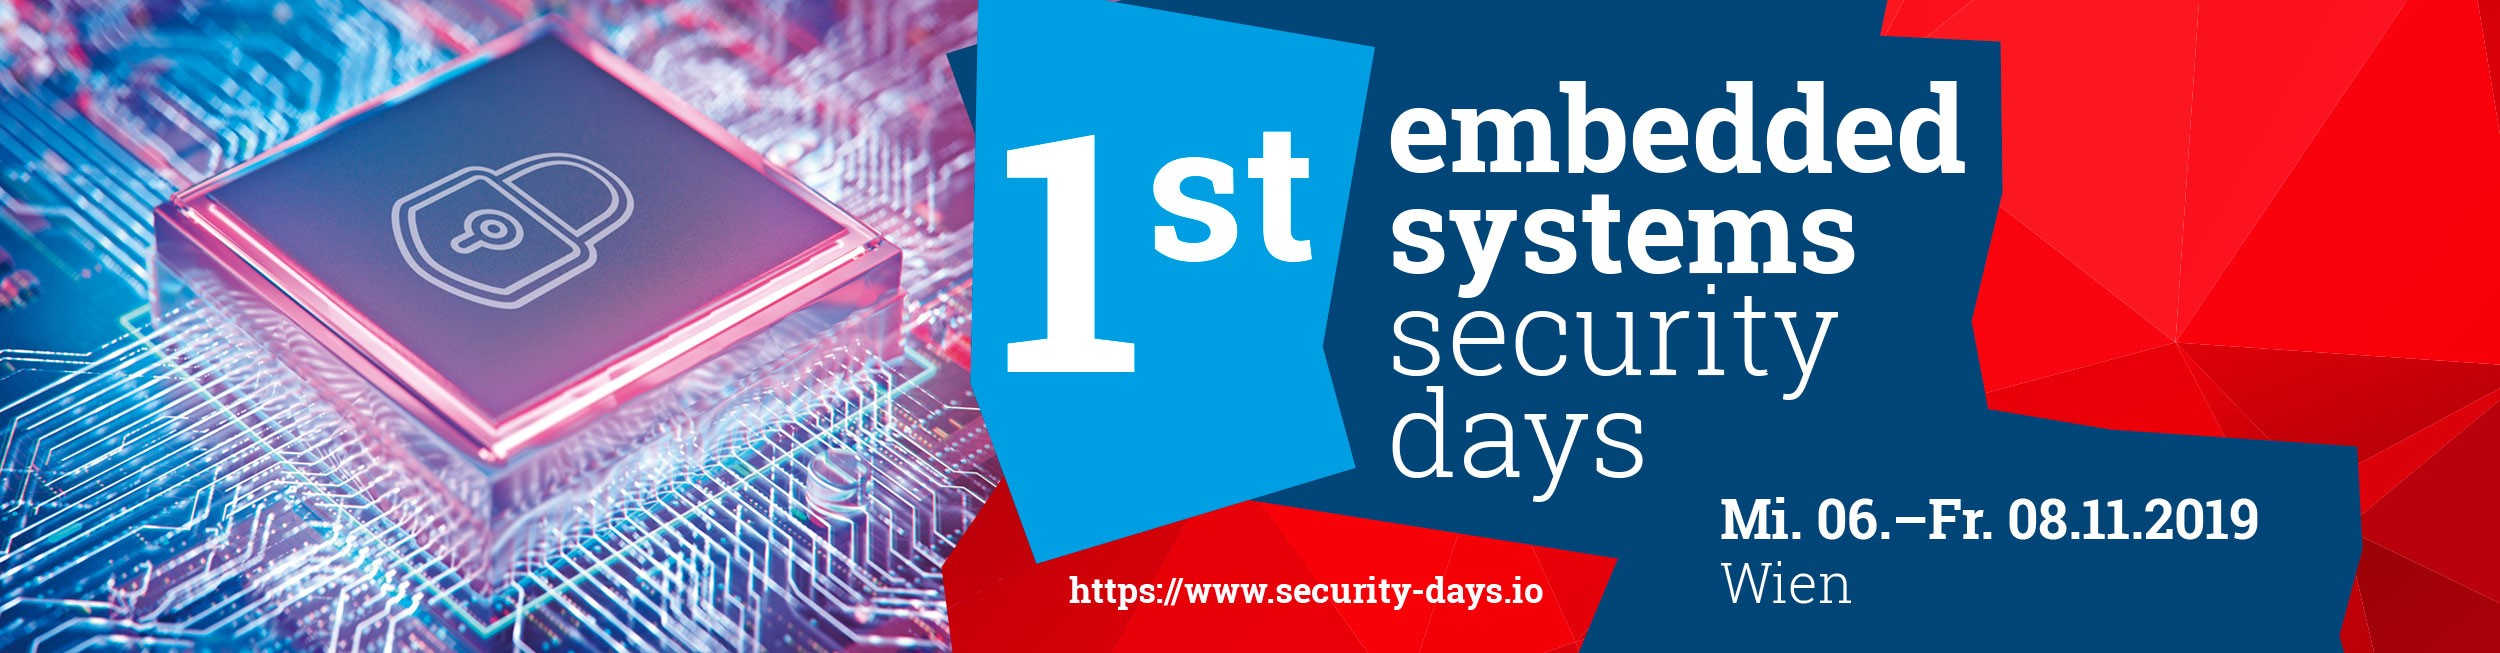 banner for embedded systems security days, Nov 6-8, 2019